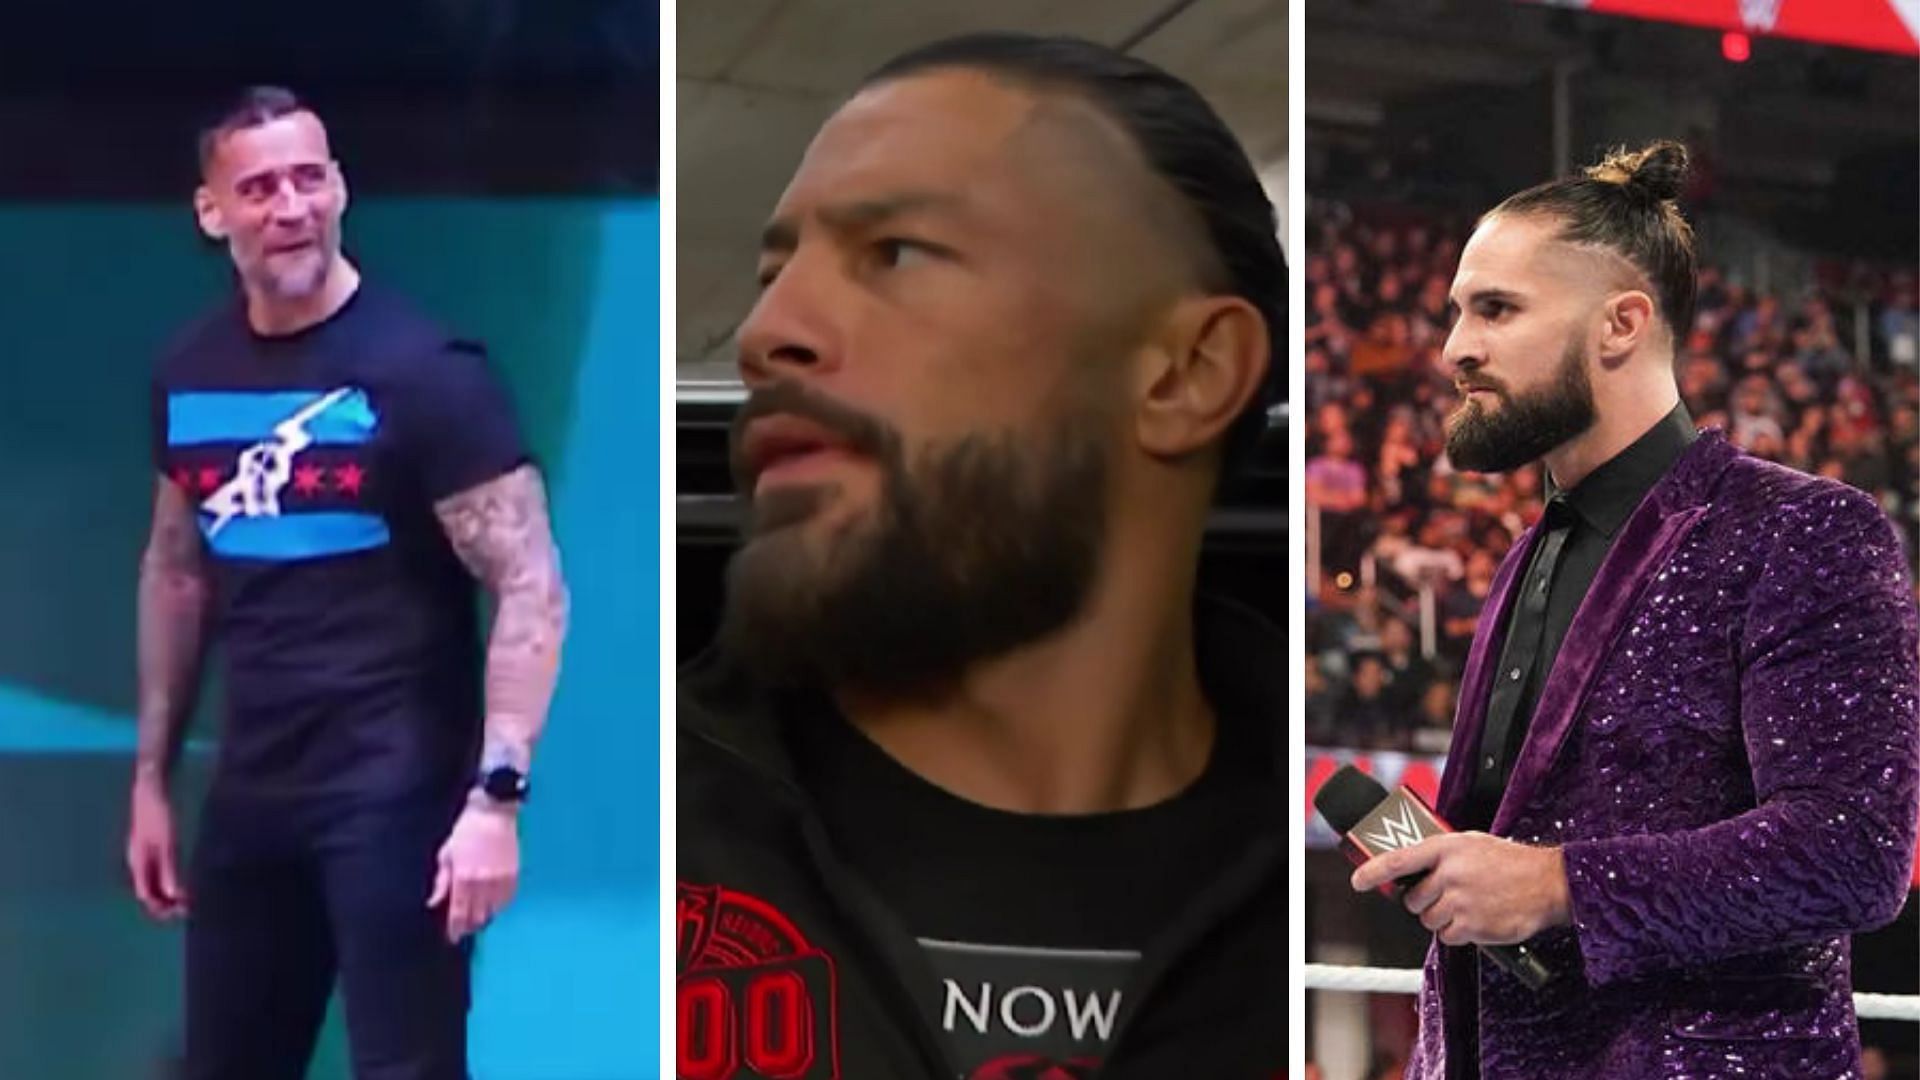 CM Punk on the left, Roman Reigns in the middle, Seth Rollins on the right